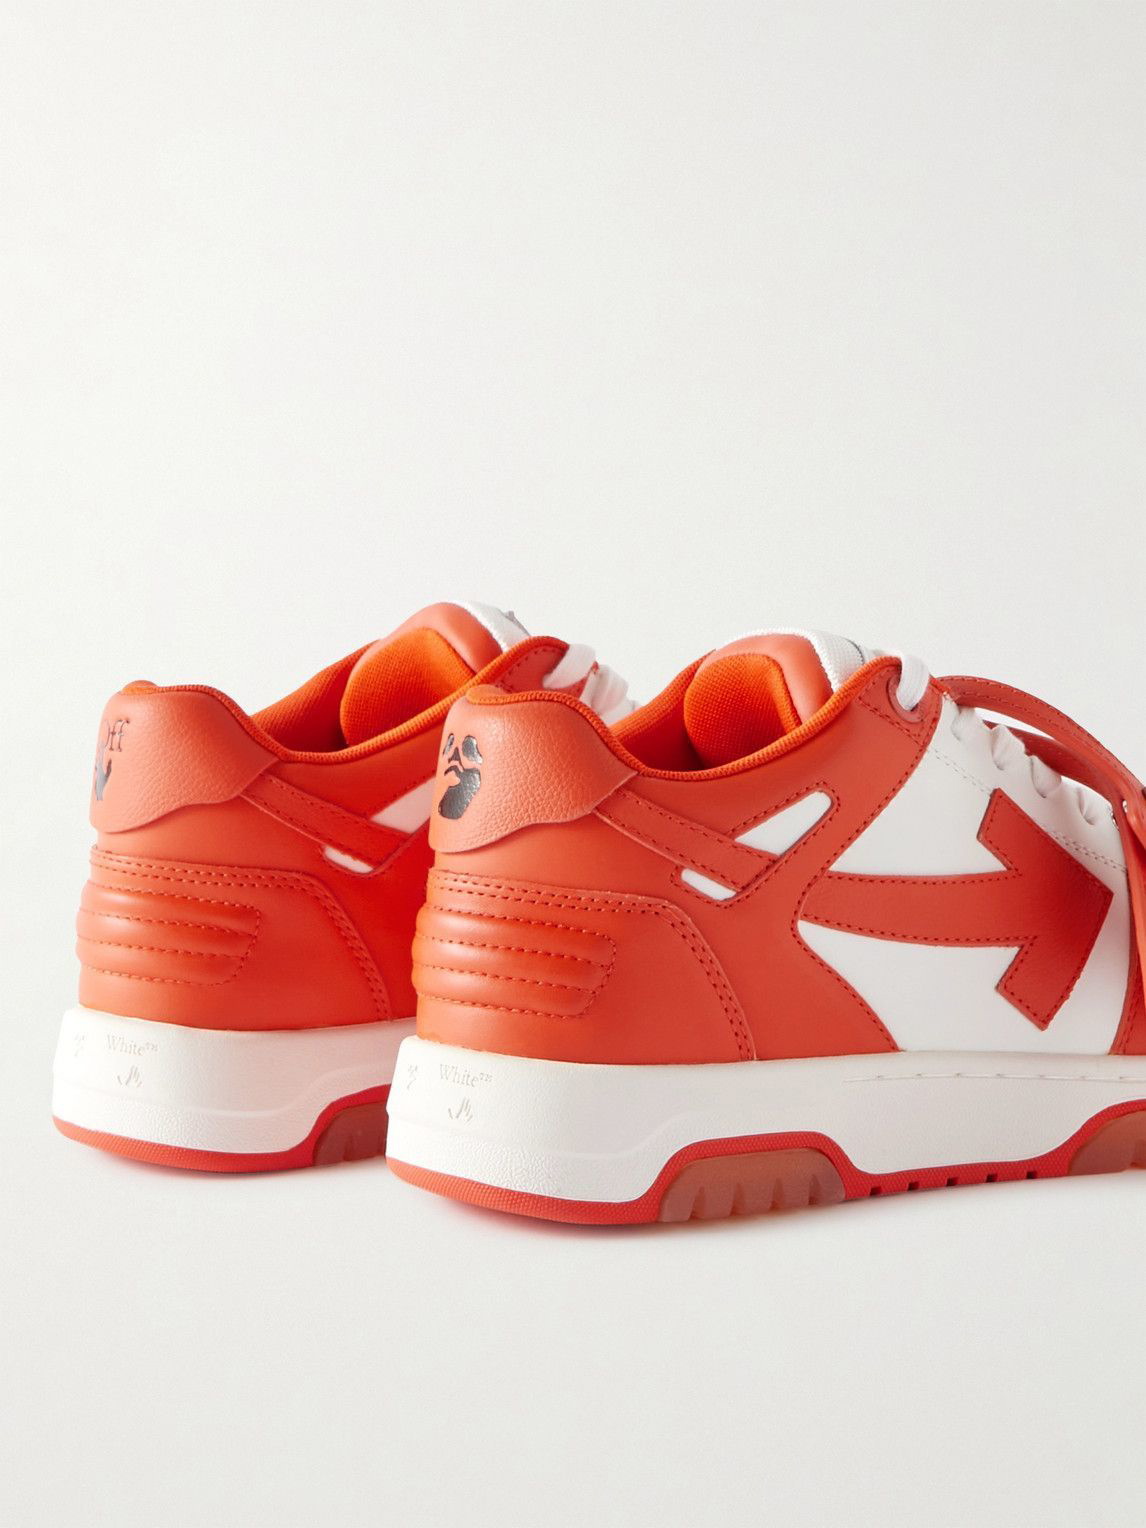 Off-White - Men - Out of Office Leather Sneakers Orange - EU 41